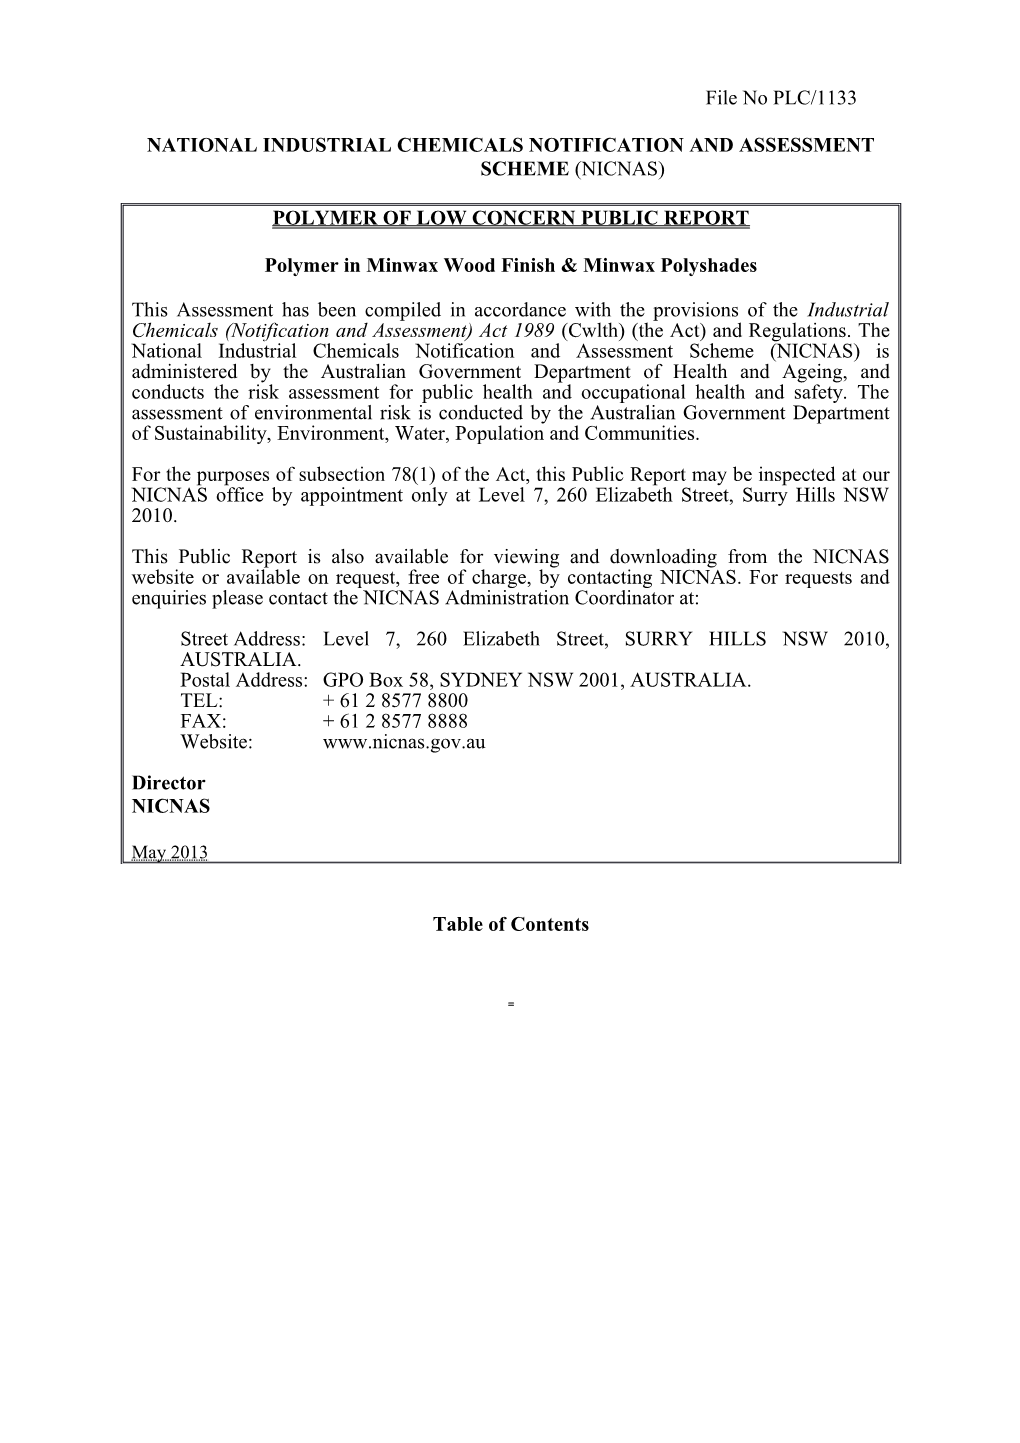 National Industrial Chemicals Notification and Assessment Scheme (Nicnas)